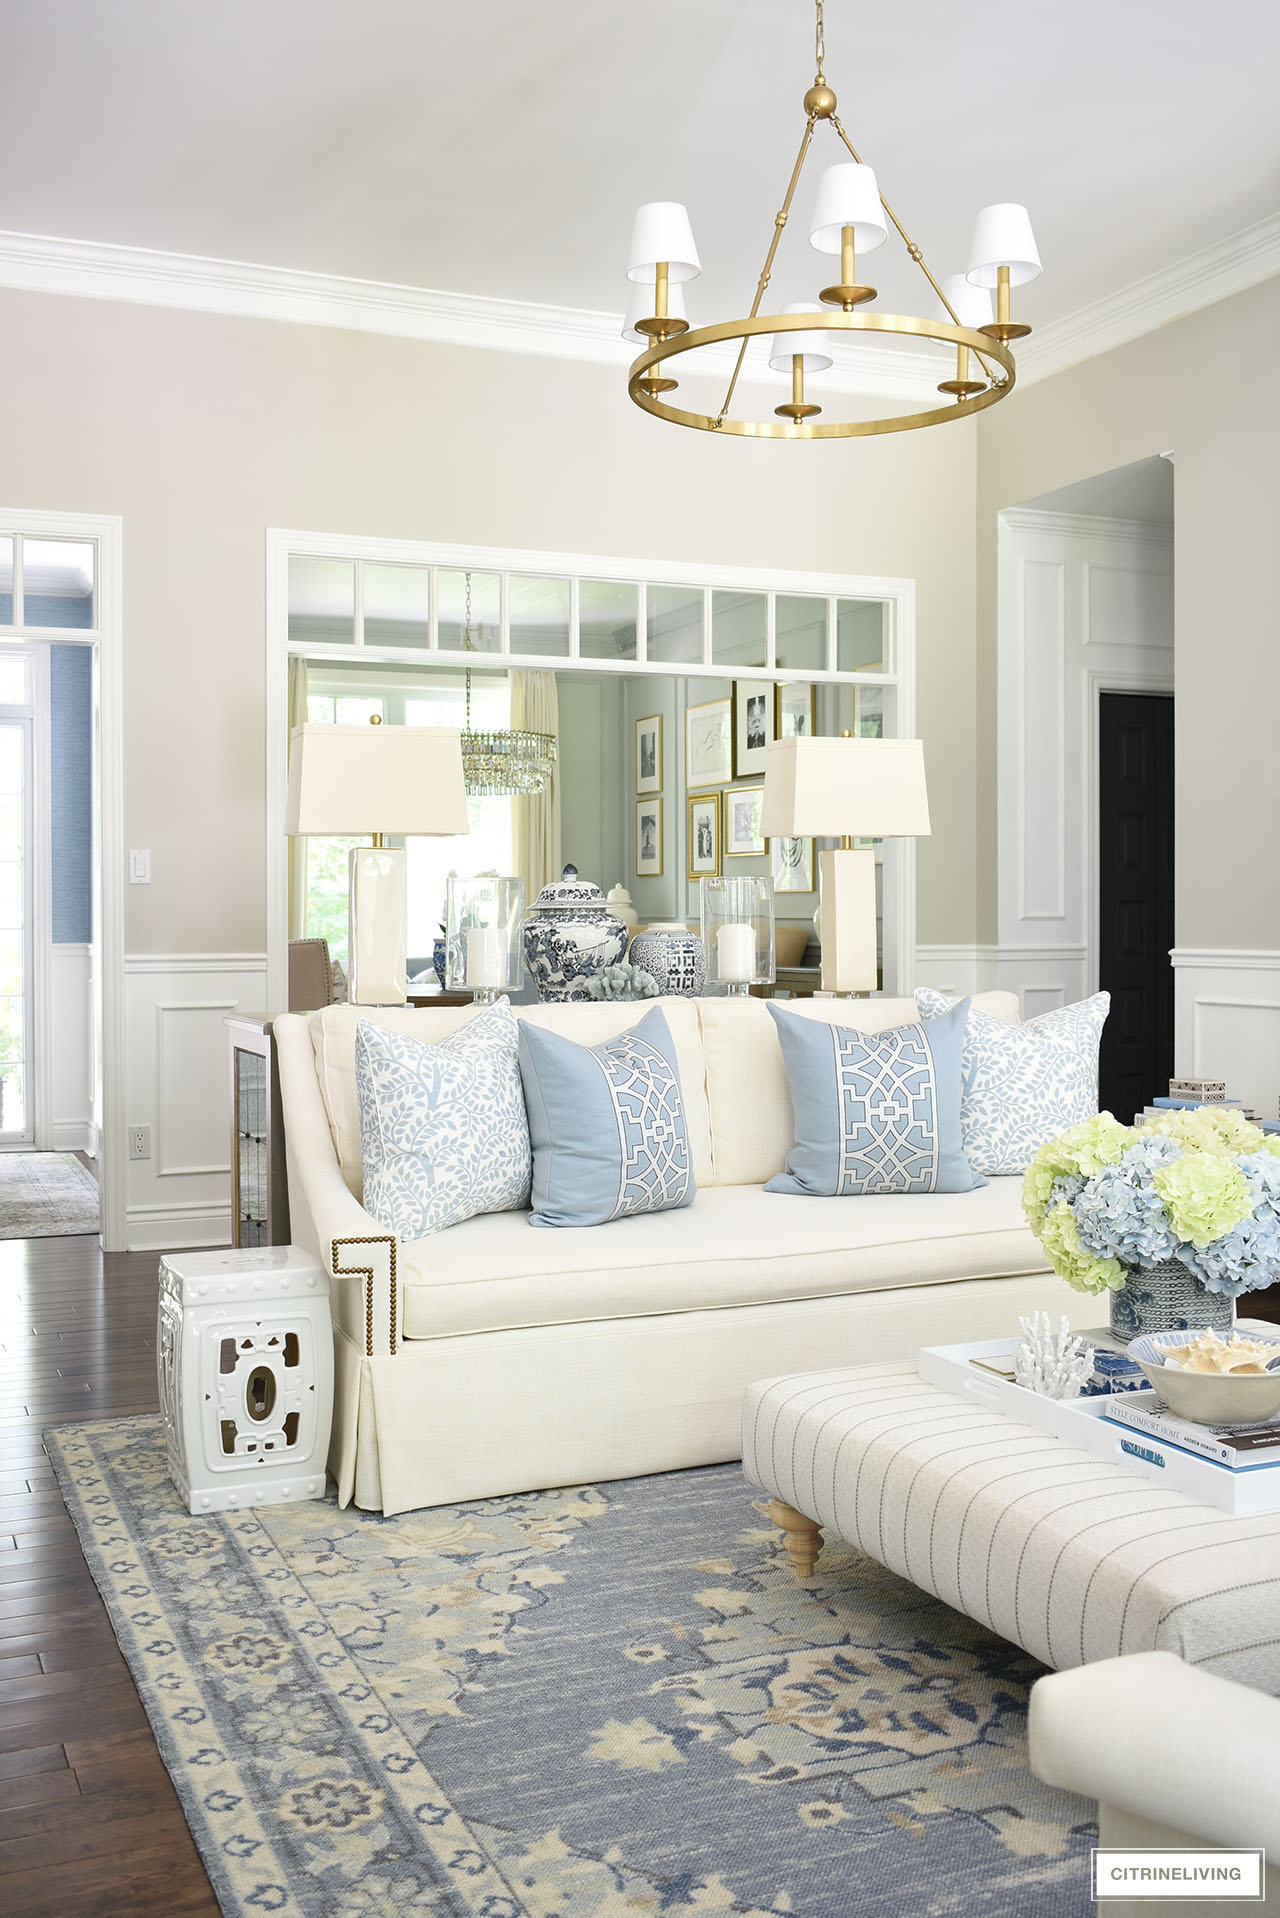 Elegant traditional living room with a modern feel - a light blue and white color palette is light and fresh for summer.